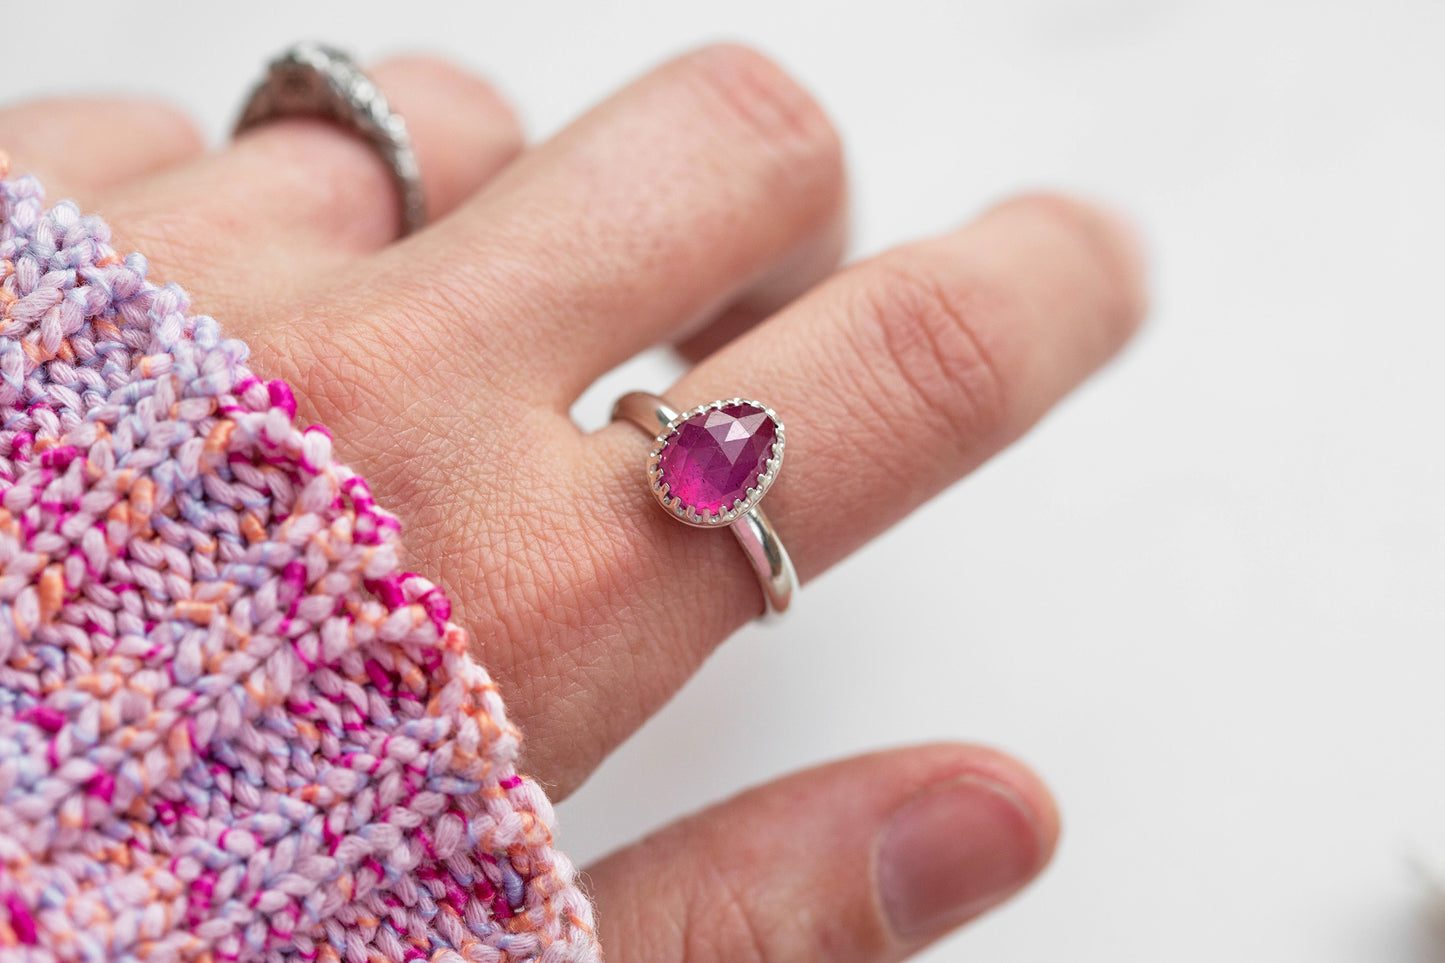 Size 8.5 | Pink Sapphire Ring | #14